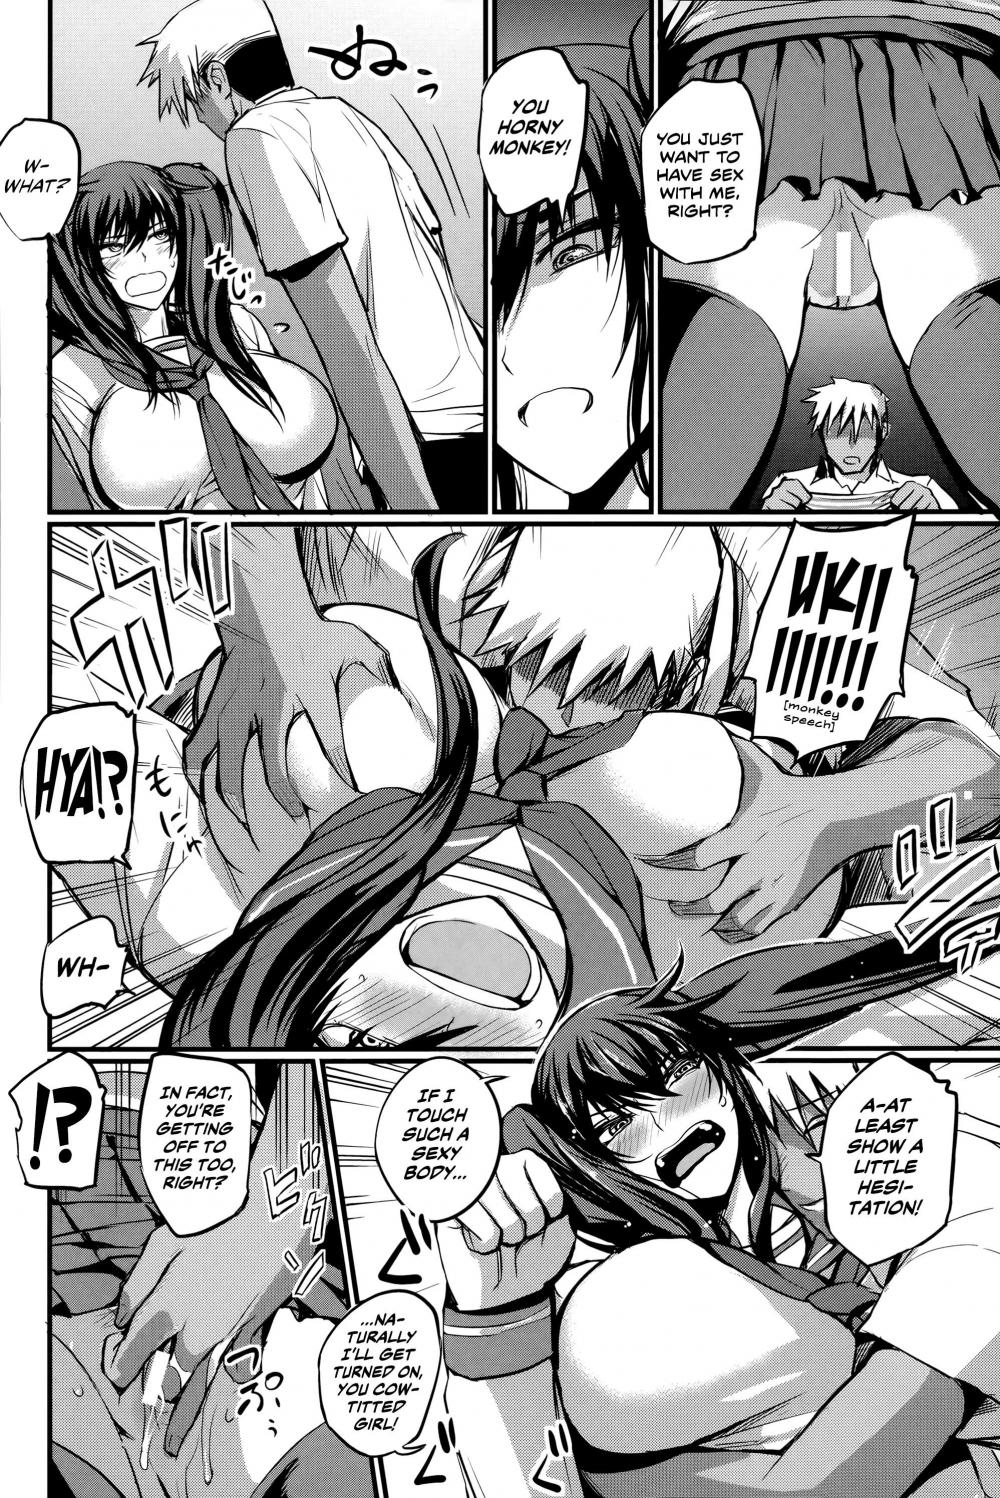 Hentai Manga Comic-How To Stop A Suicide-Read-6